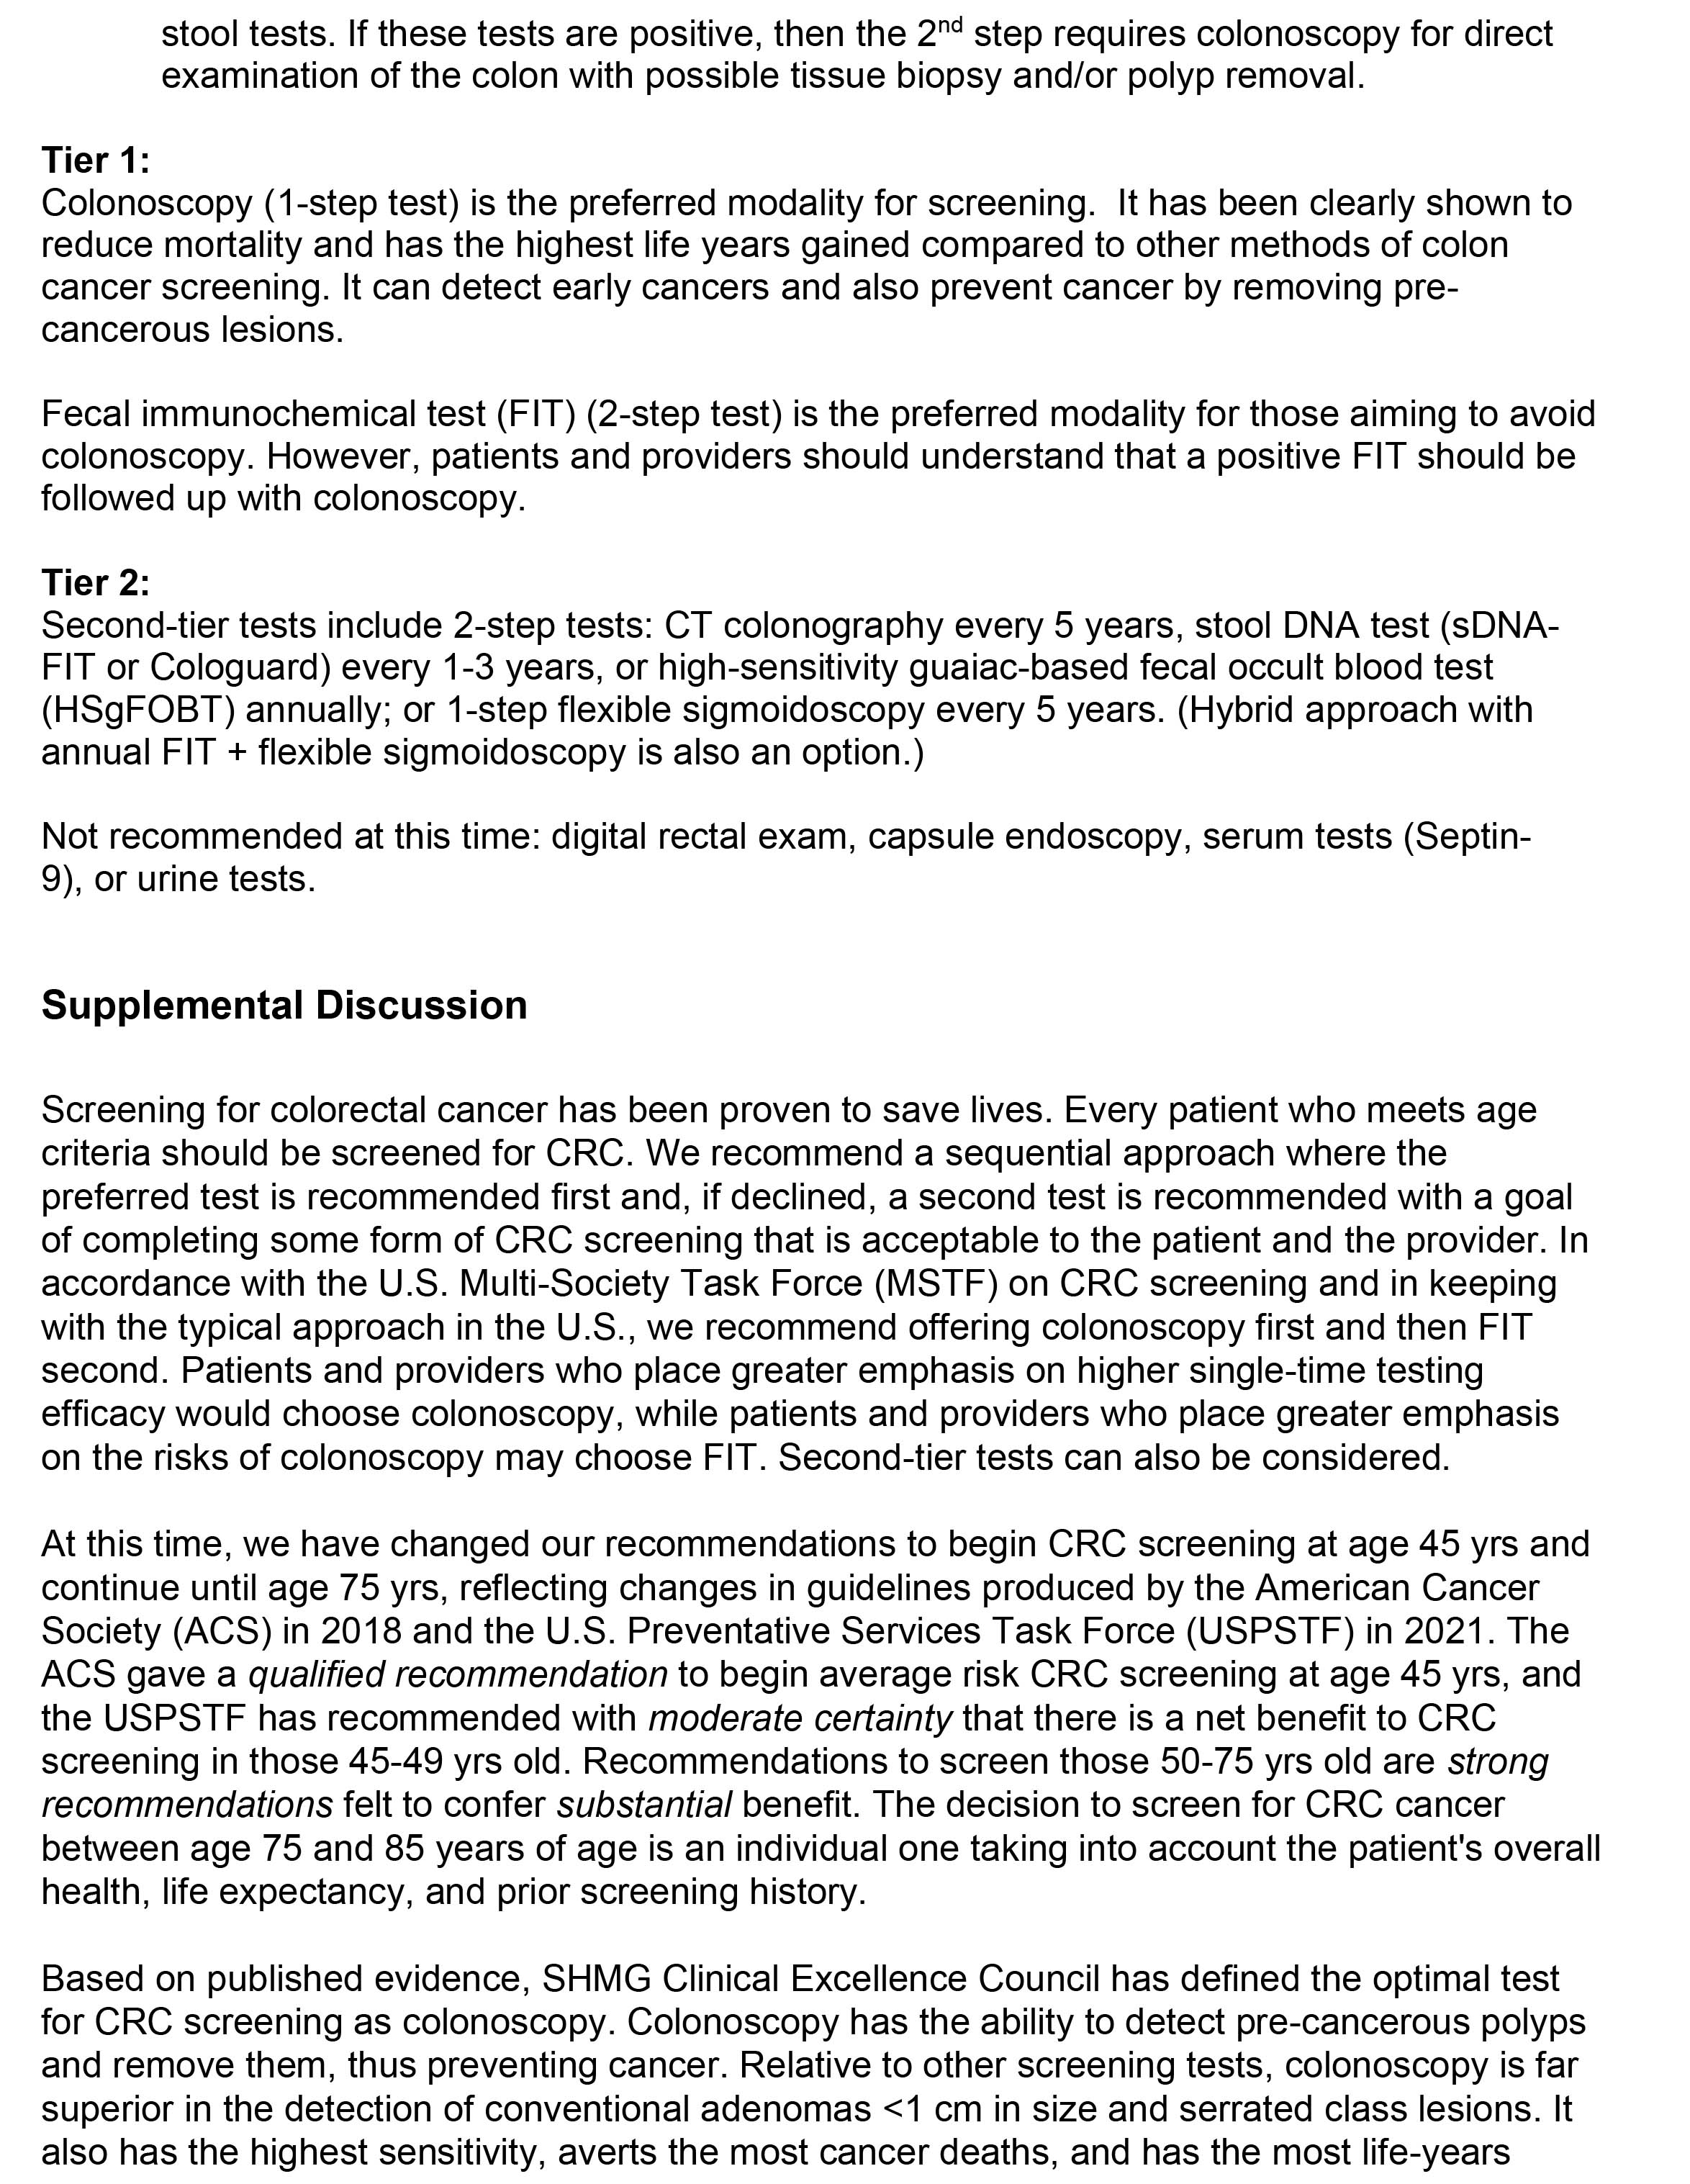 colorectal cancer screening guideline page three